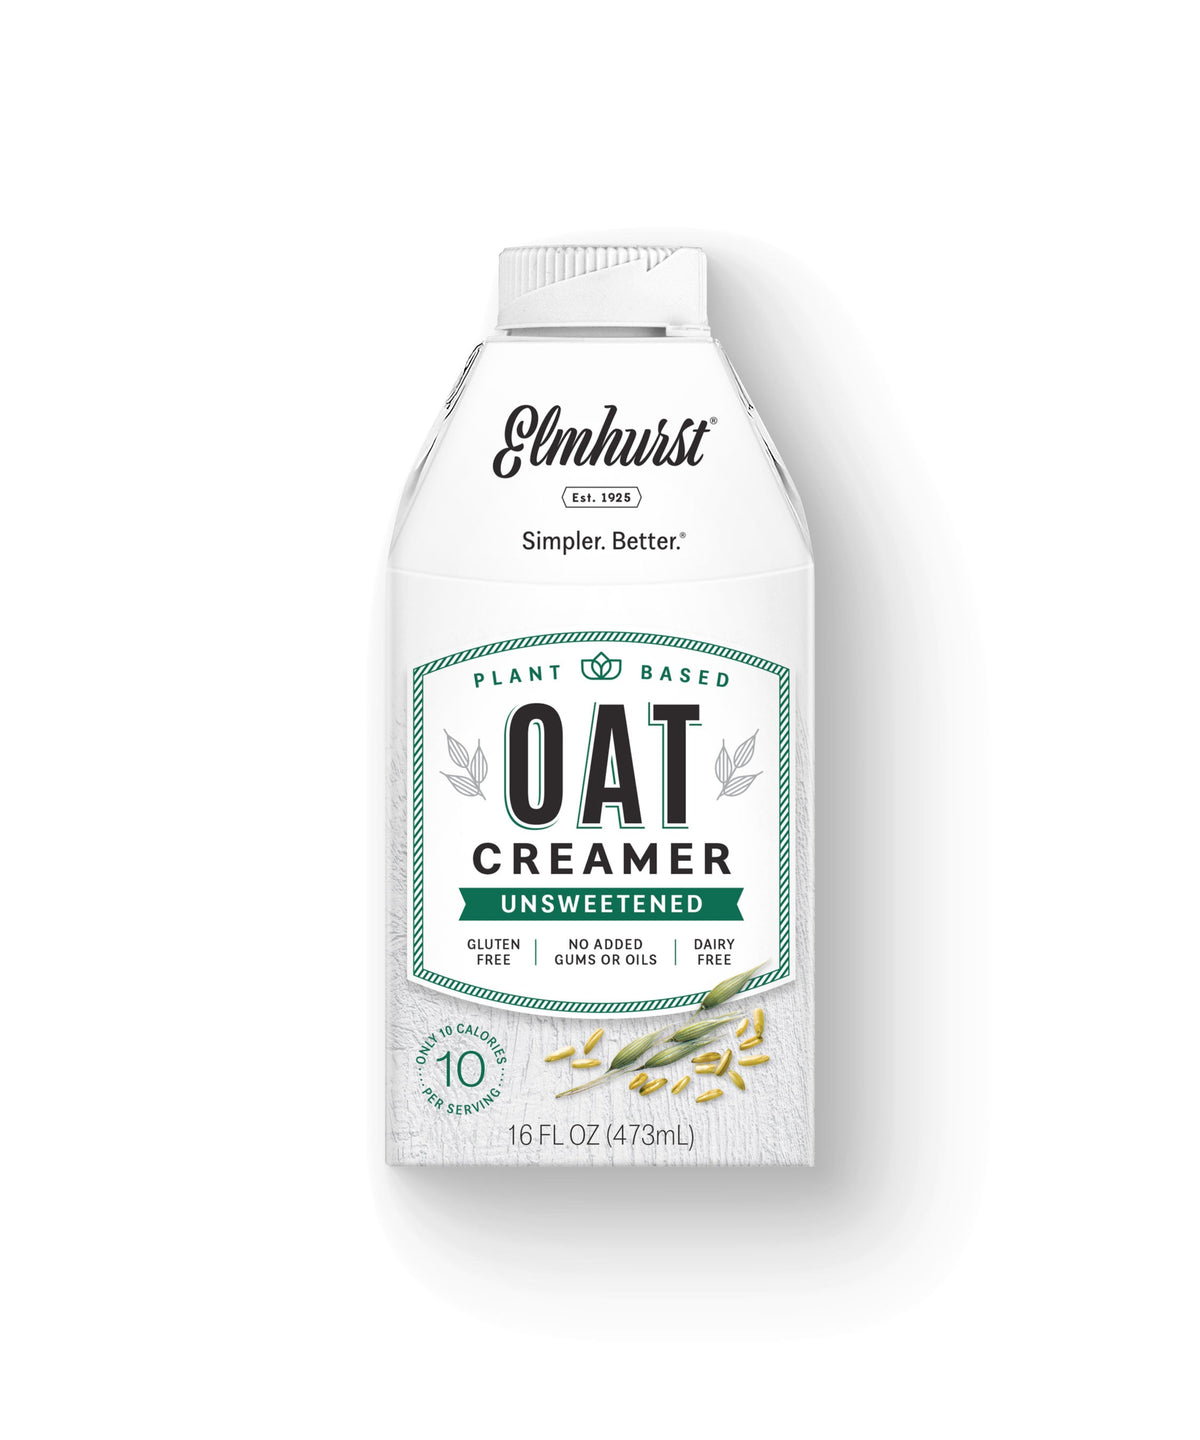 Oat Creamer Variety 4-Pack exclusive at Tastermonial